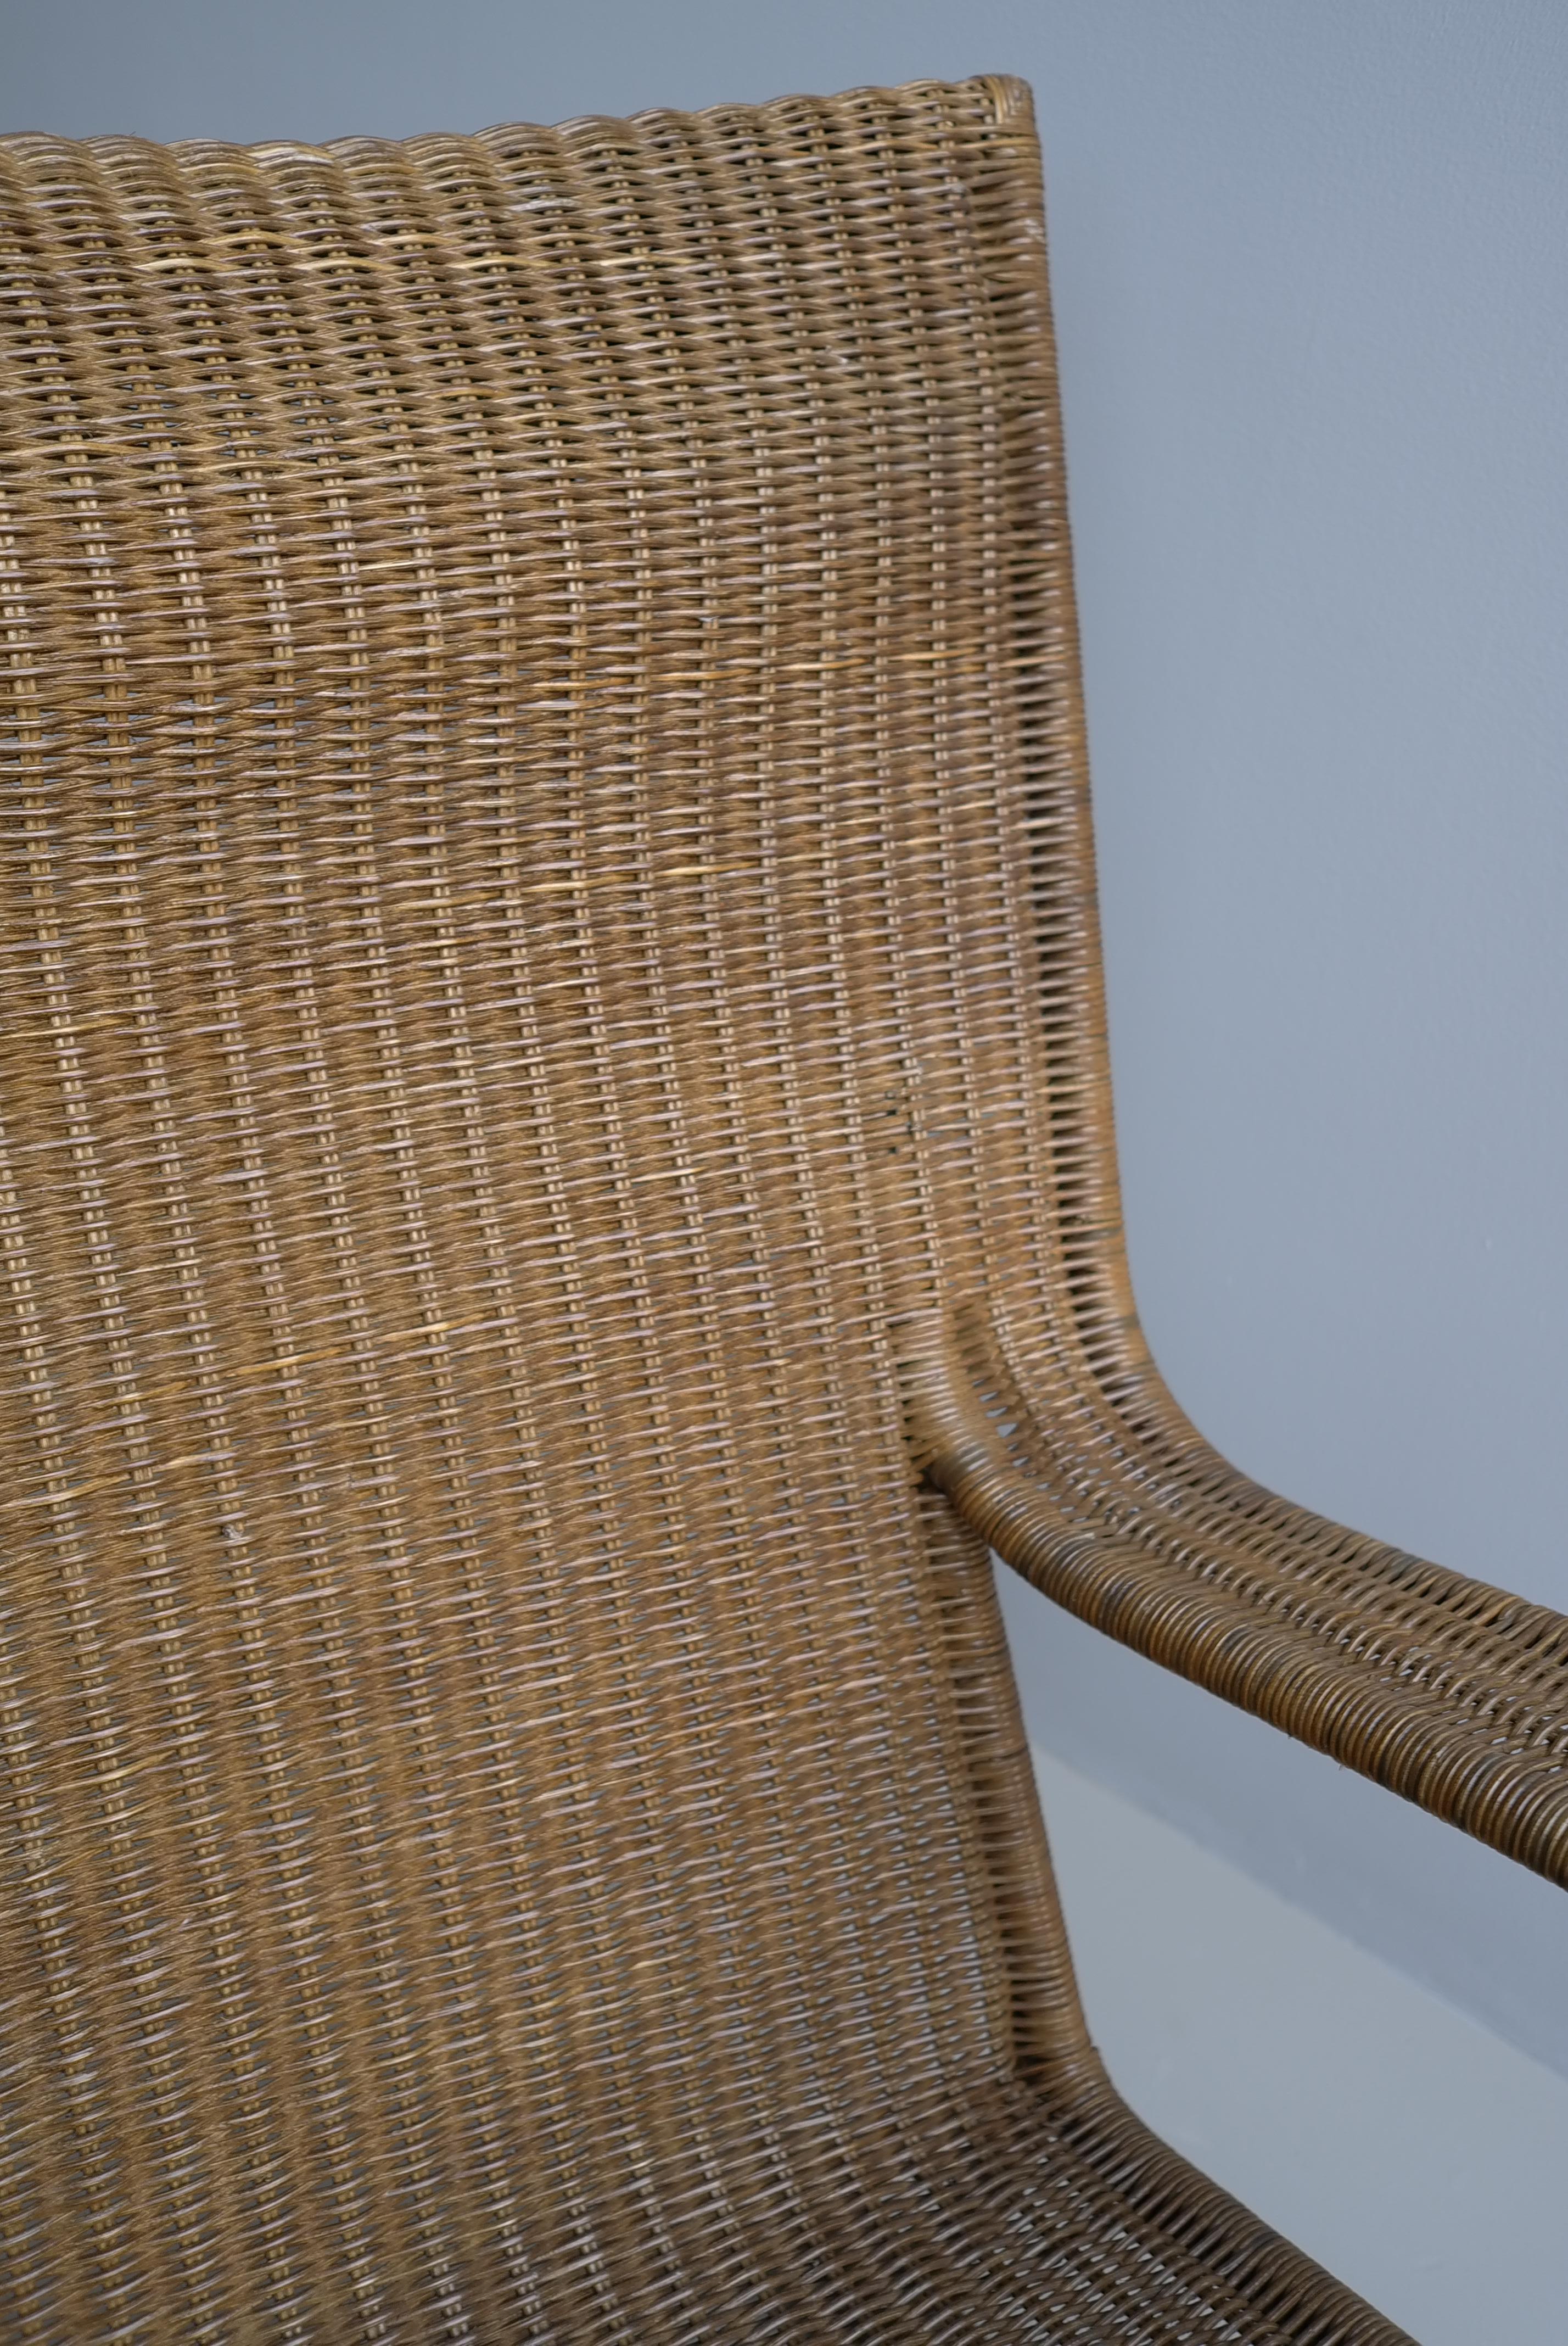 Large Sculptural Wicker Lounge Chair, France circa 1970 For Sale 6